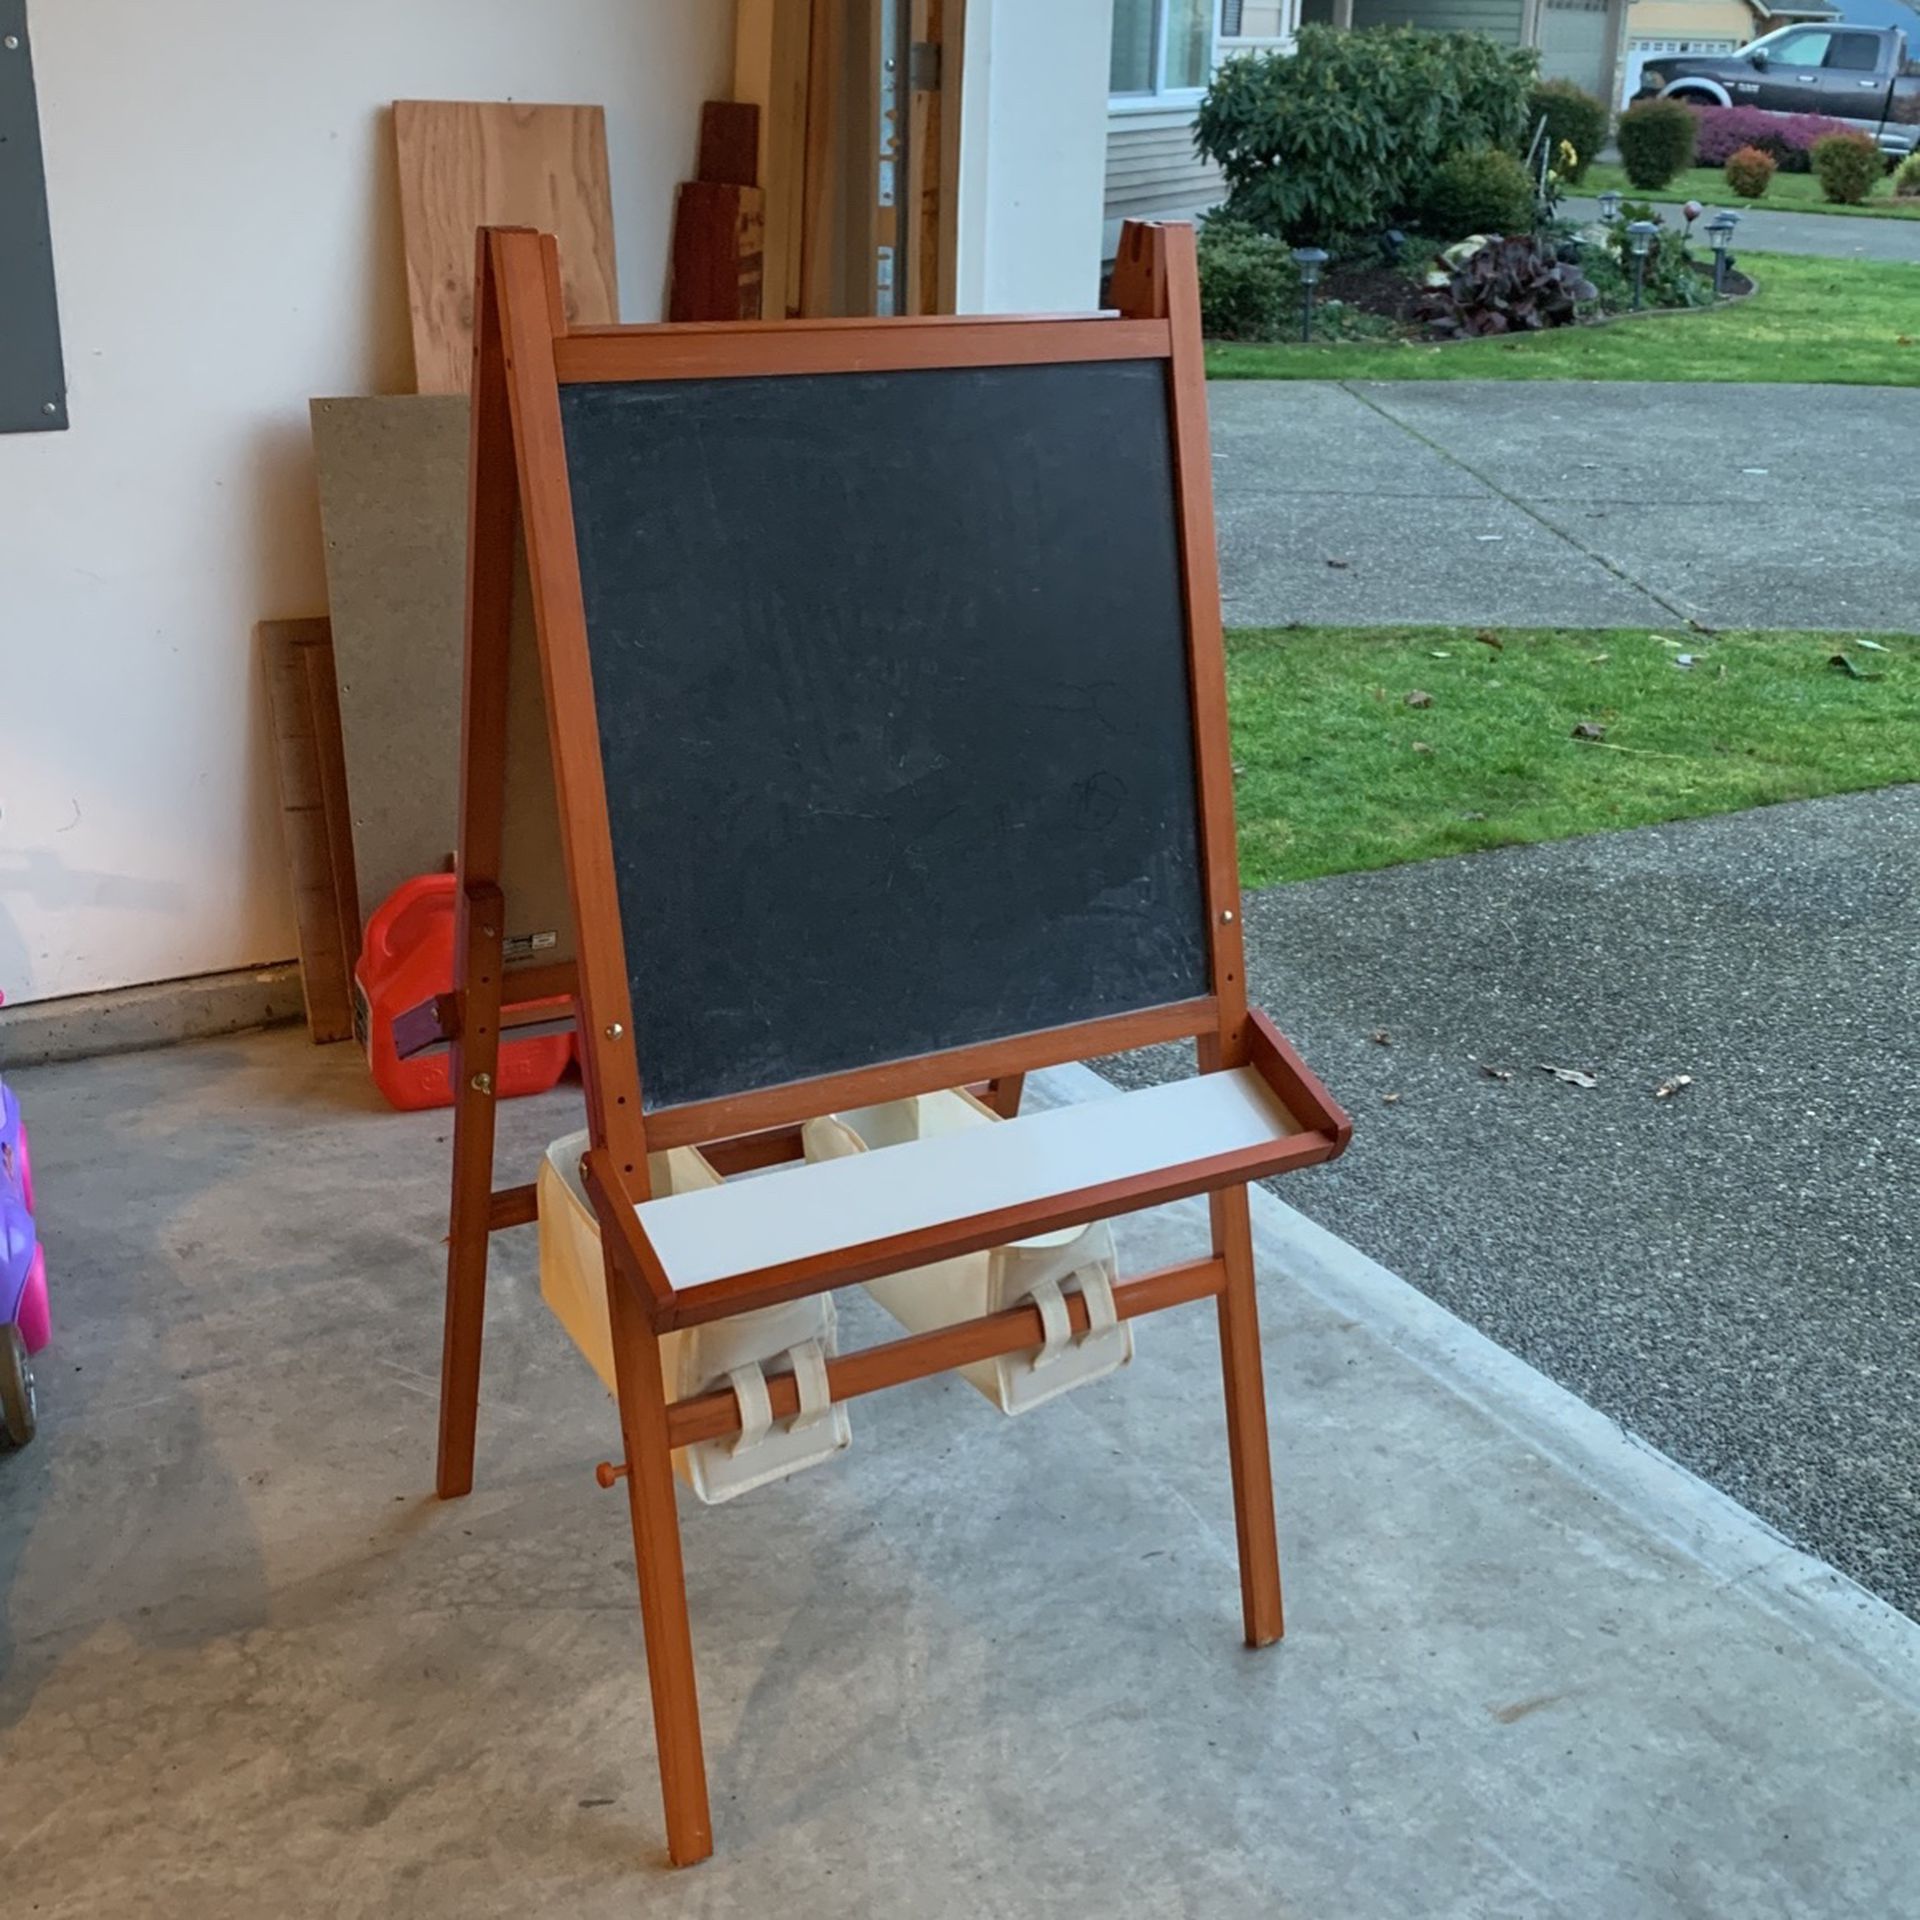 Free Kids Easel- Pending Pick Up Today